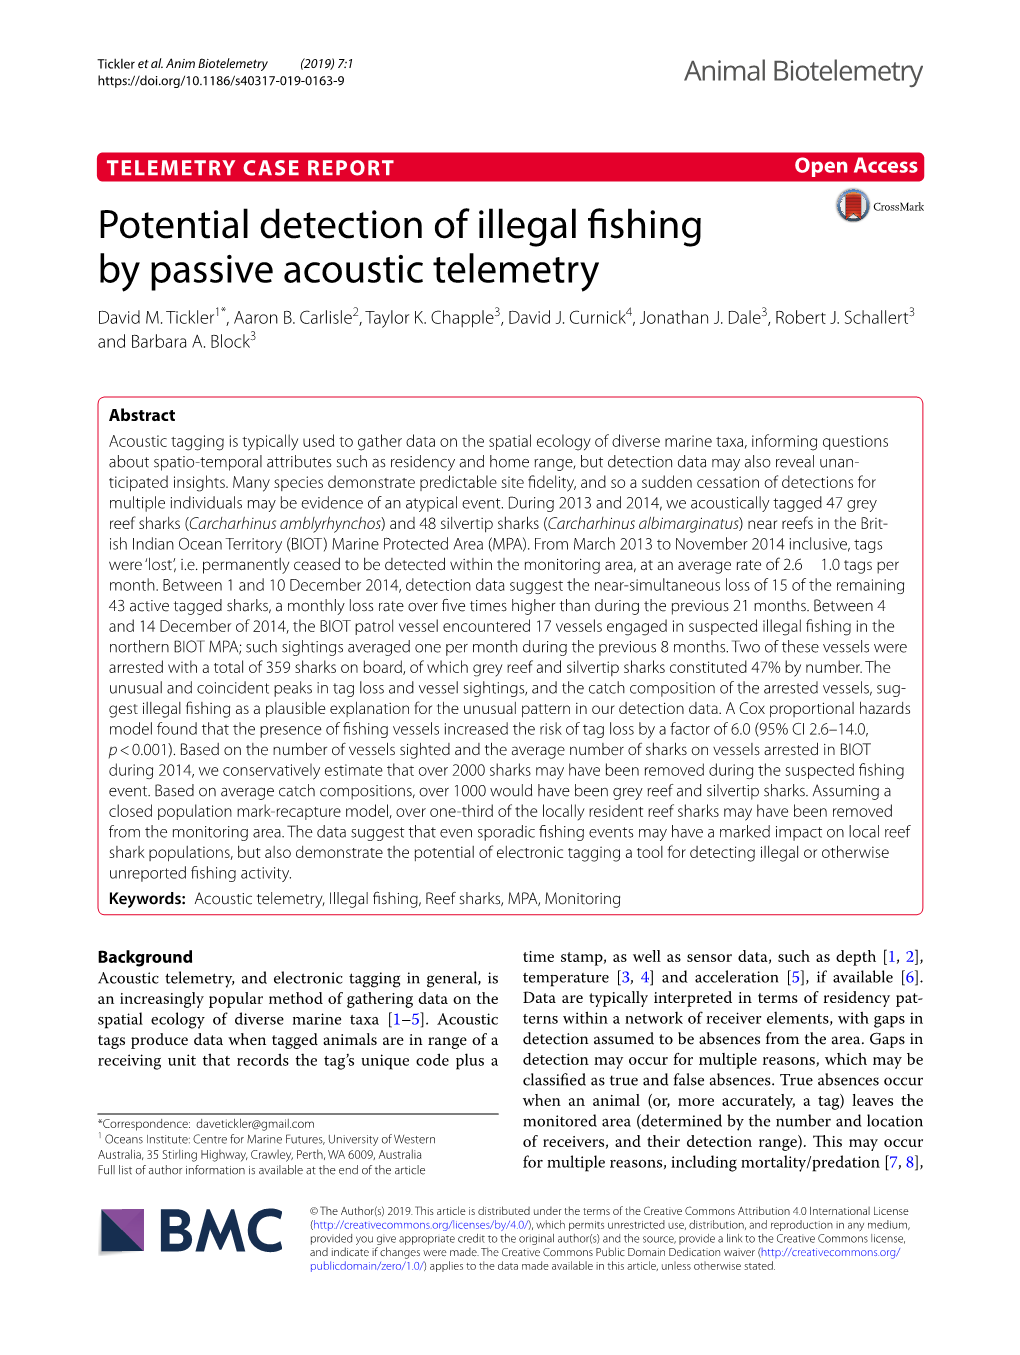 Potential Detection of Illegal Fishing by Passive Acoustic Telemetry